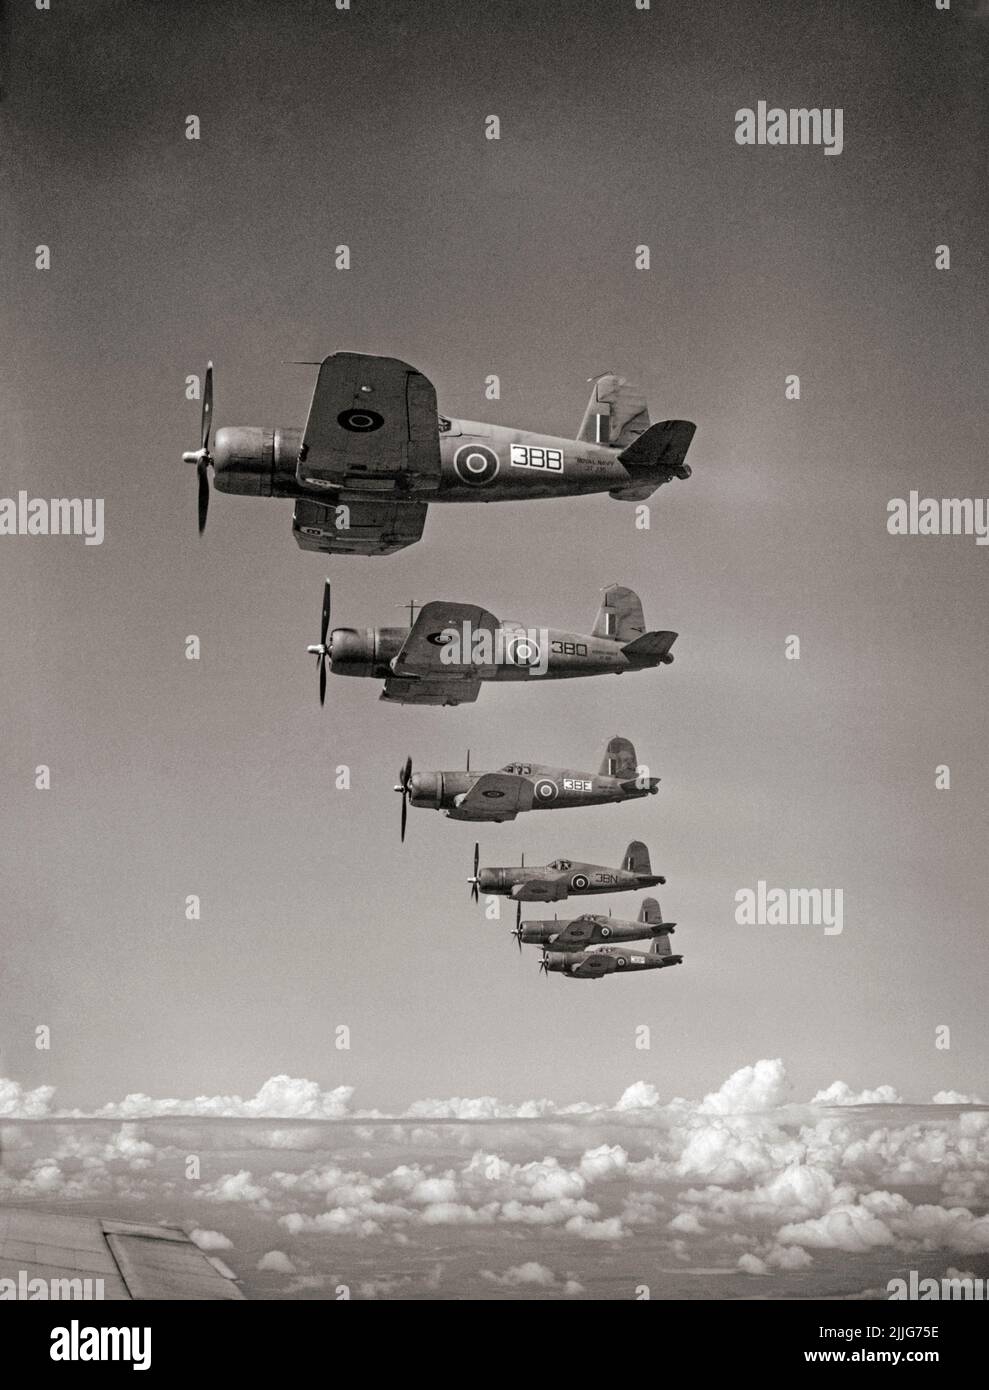 Formation photograph of six British Naval Airmen flying American built Chance-Vought Corsairs, with British markings during training. The Vought F4U Corsair was an American fighter aircraft was designed and operated as one of the most capable carrier-based fighter-bombers that saw service primarily in World War II and the Korean War. Stock Photo